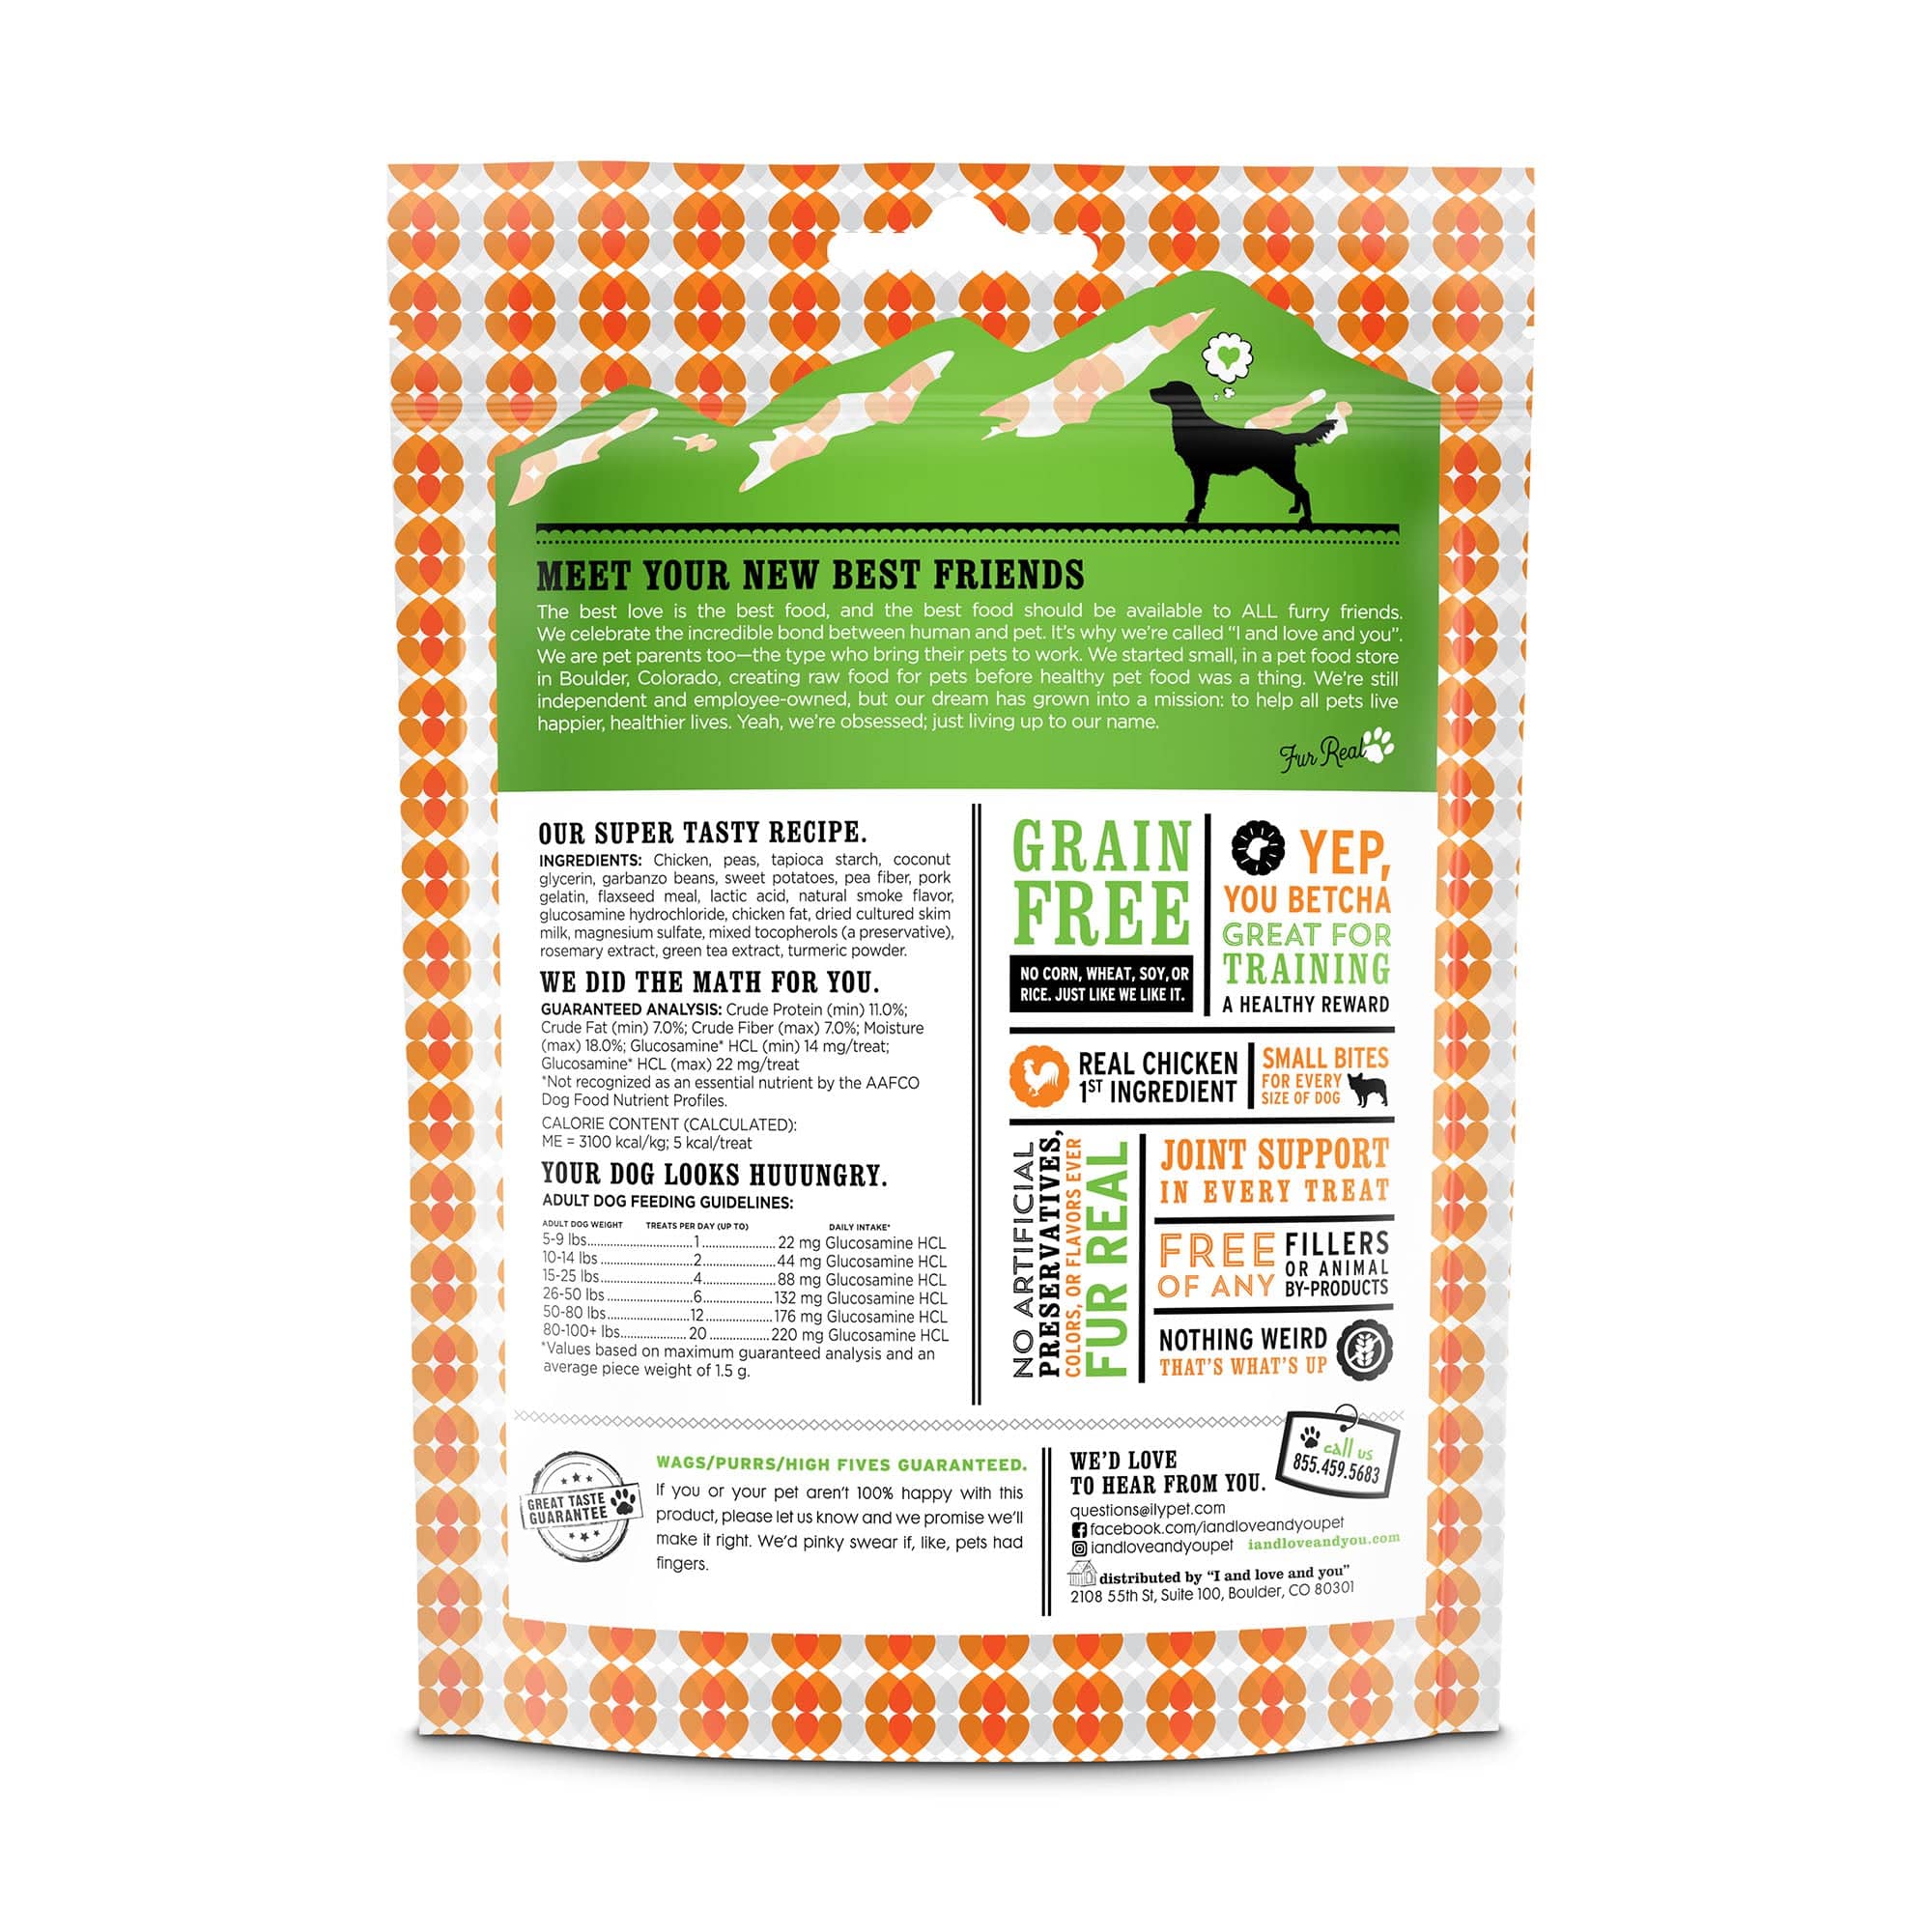 Hip Hoppin' Hearties dog treats in bag, package back side with list of ingredients, instructions and barcode